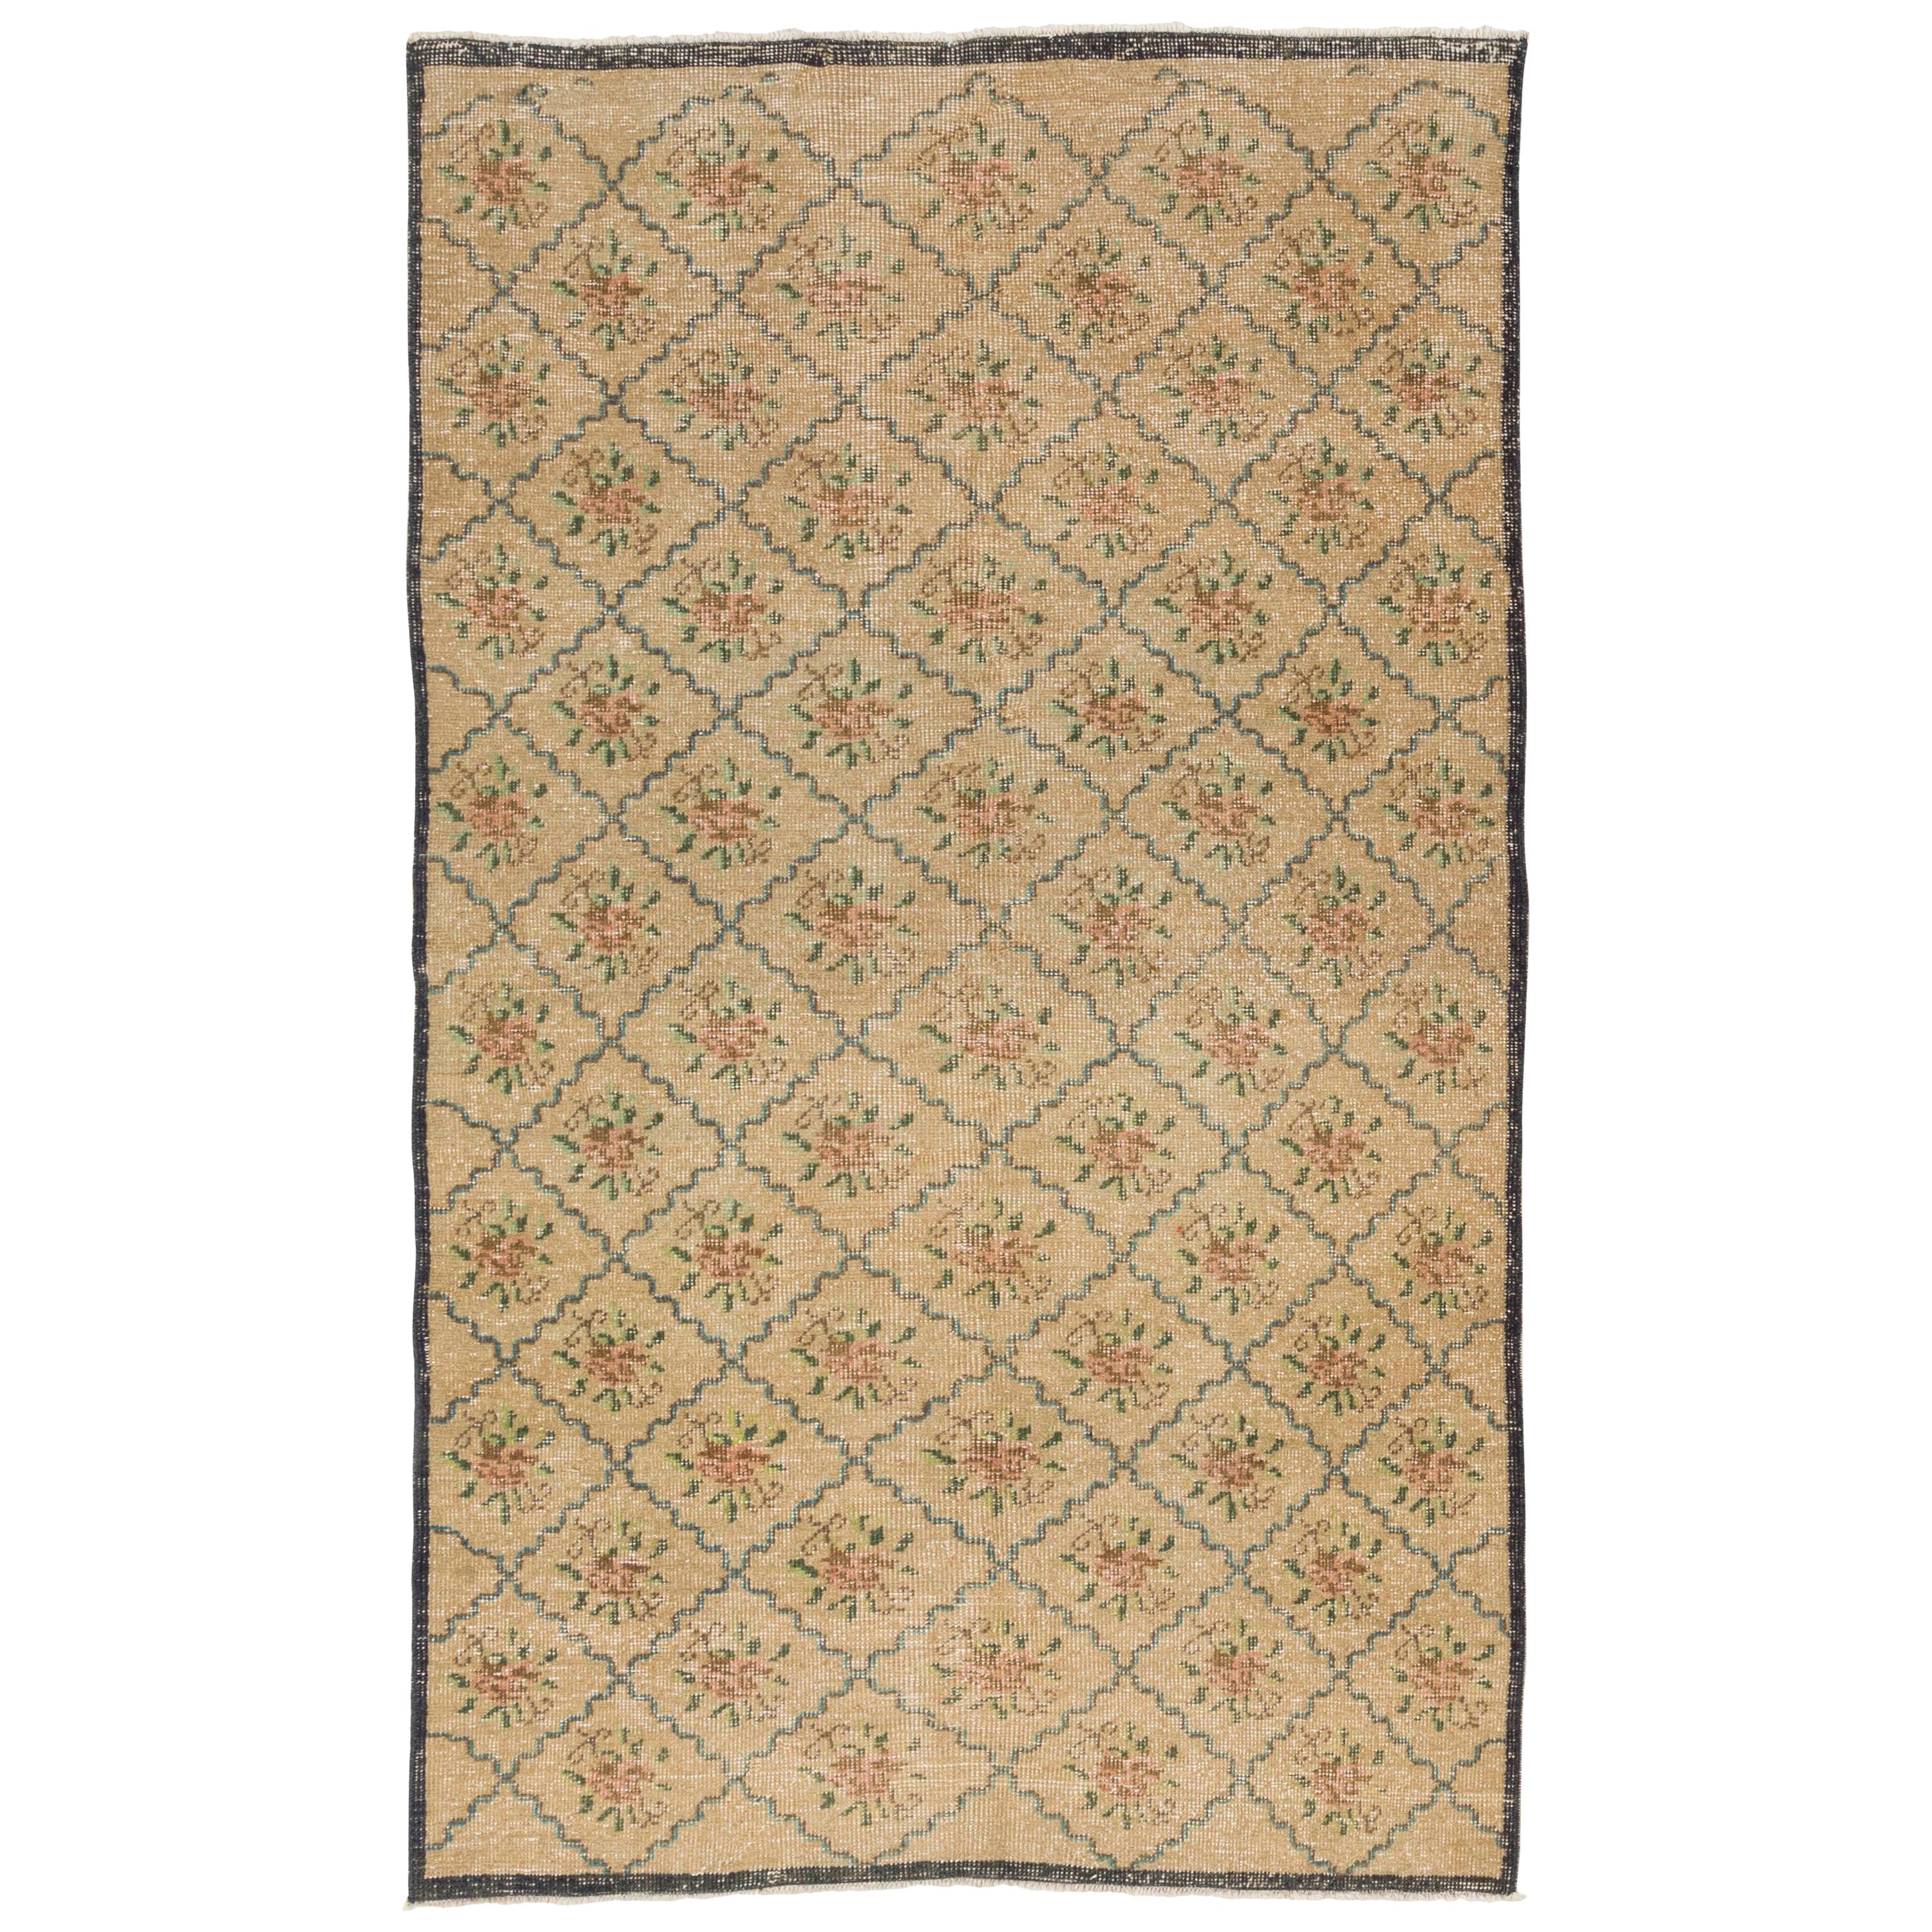 4.8x6.4 Ft Vintage Floral Design Anatolian Rug, 100% Wool Hand-Knotted Carpet For Sale